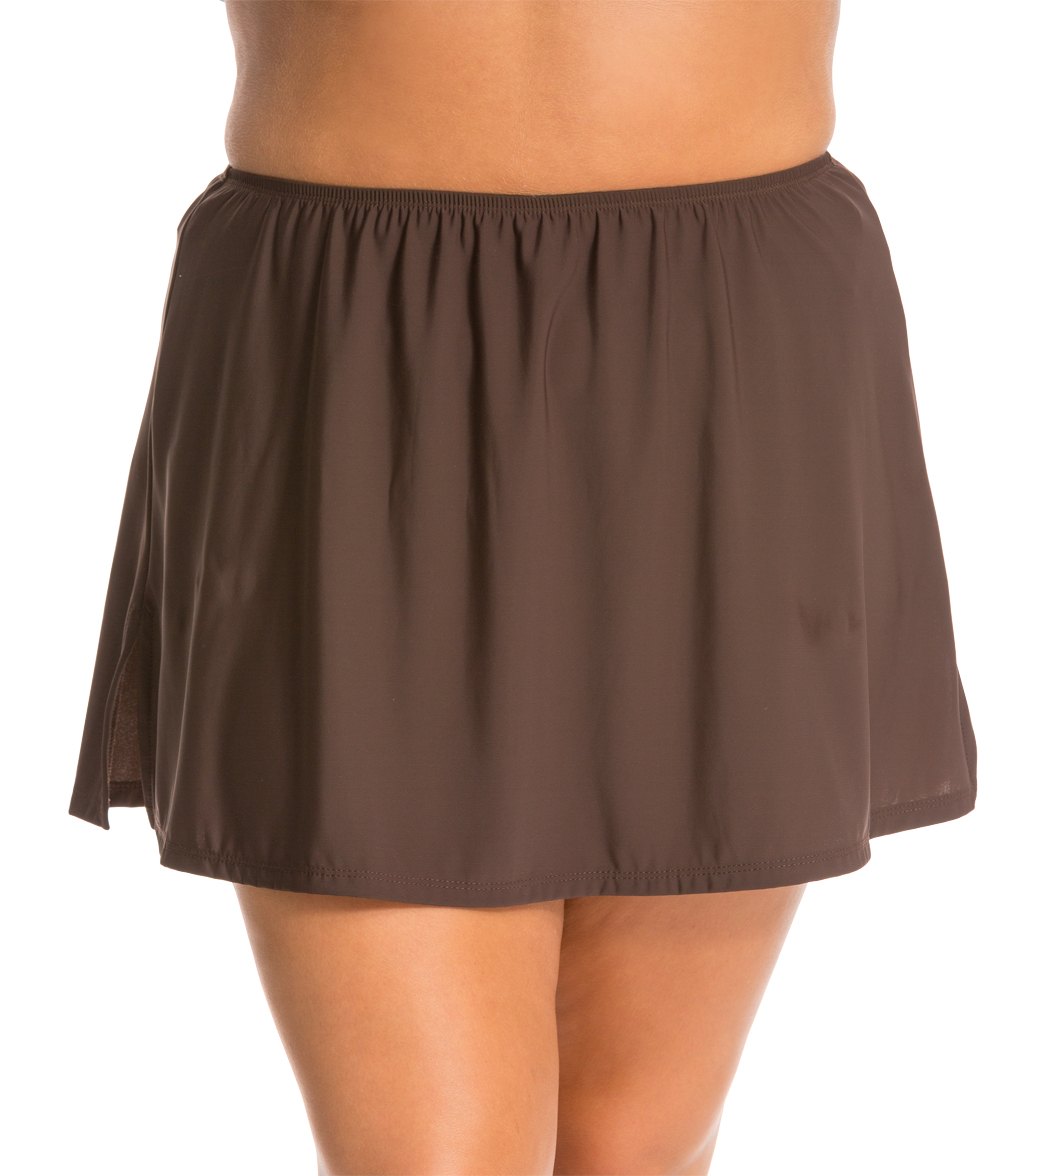 Topanga Plus Size Solid Cover Up Skirt